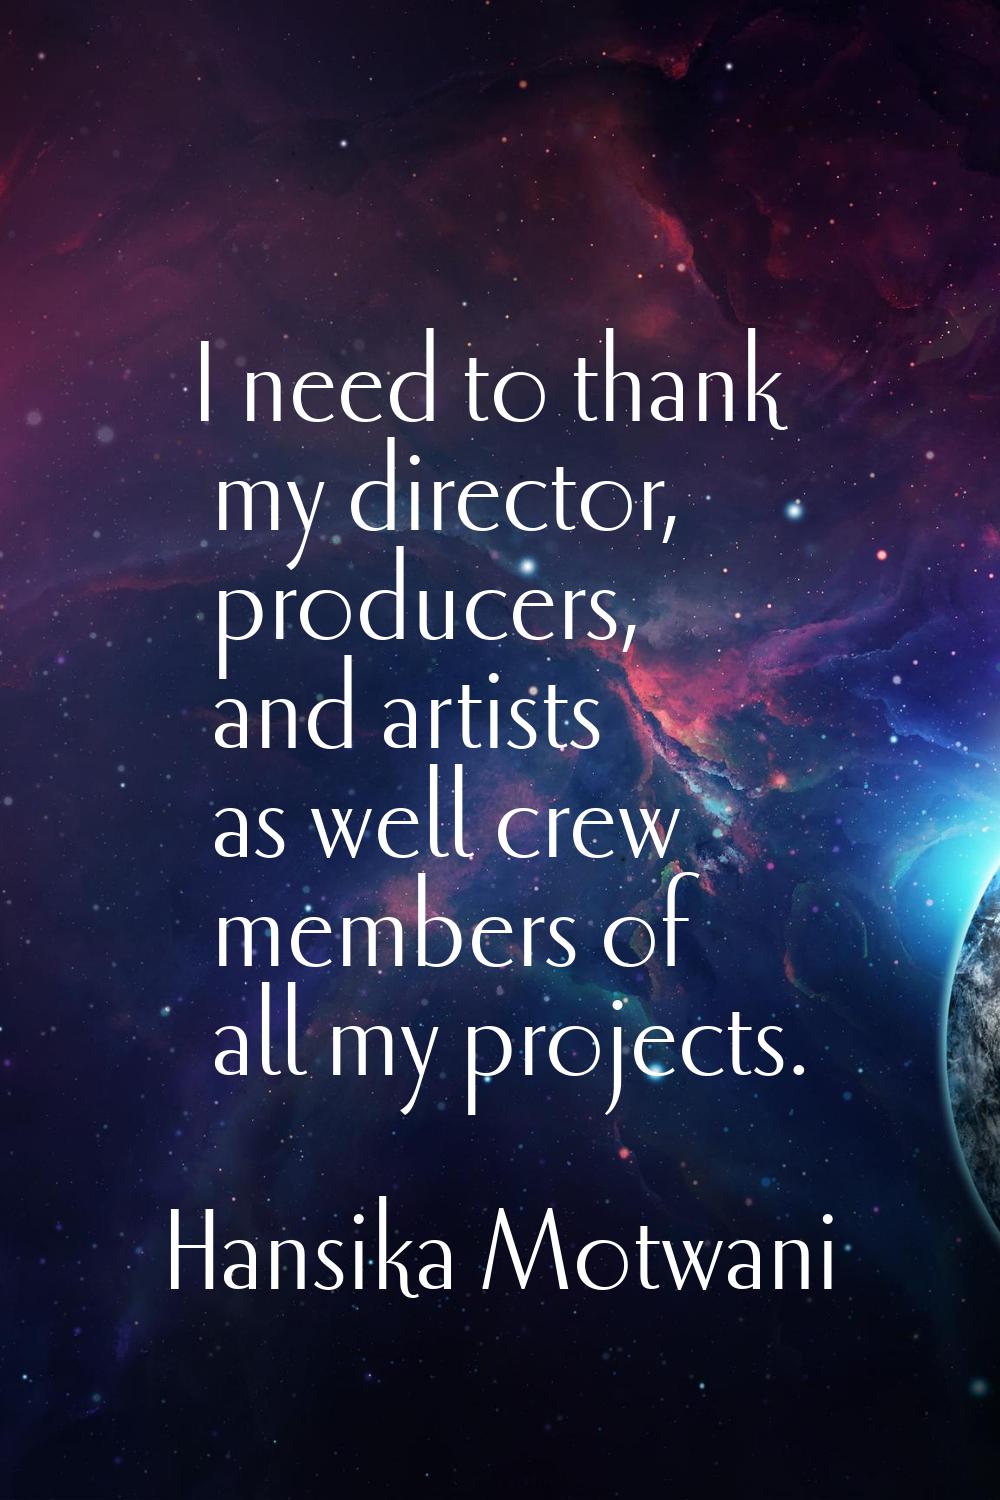 I need to thank my director, producers, and artists as well crew members of all my projects.